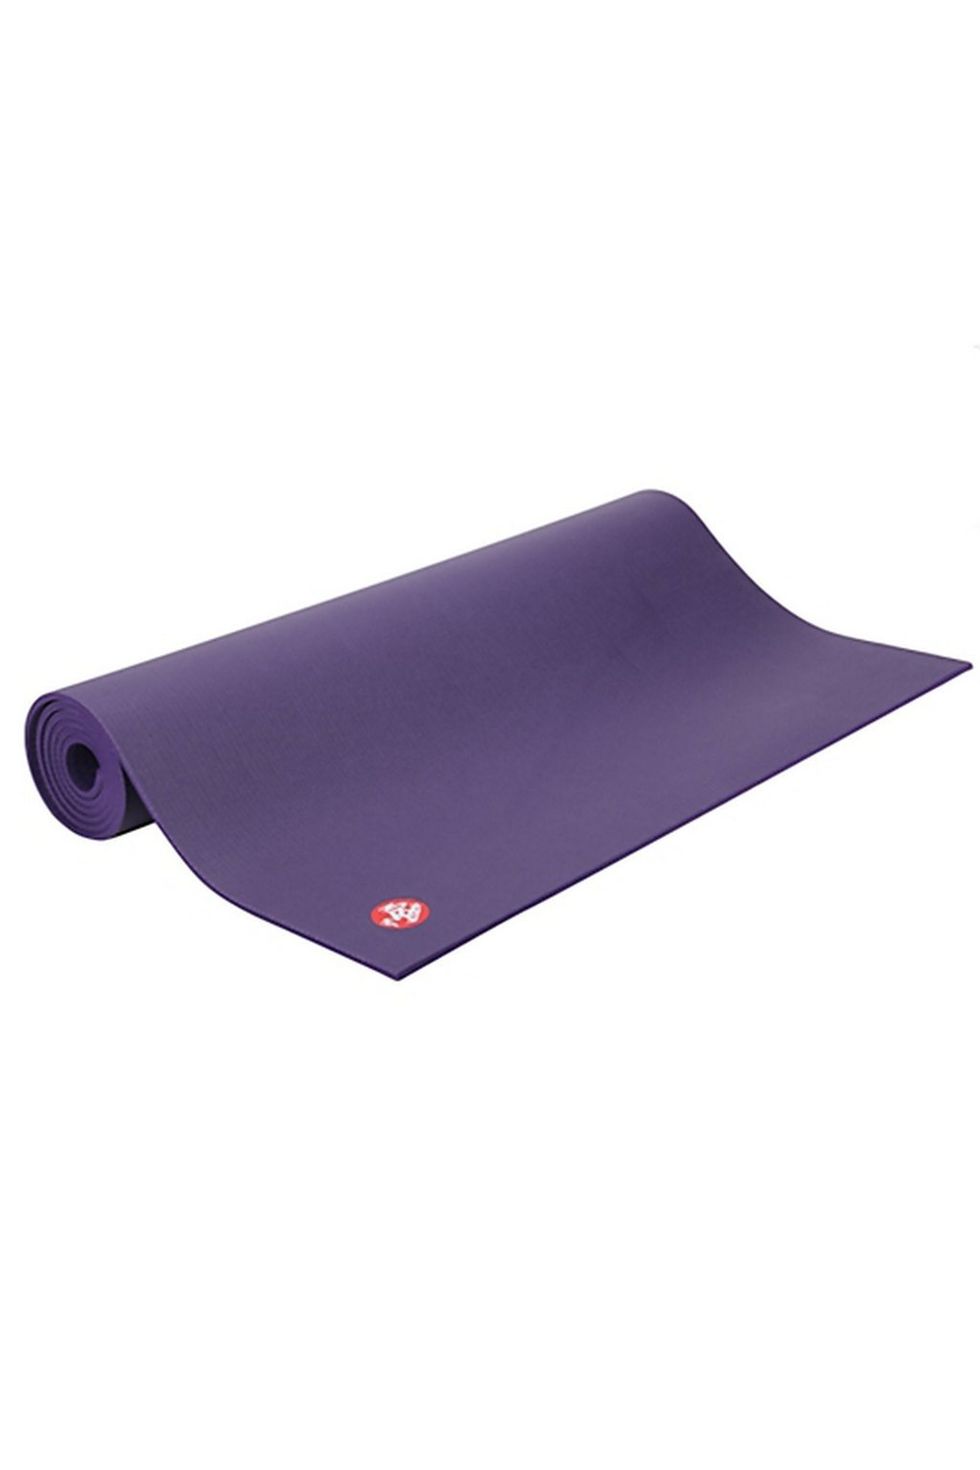 The Best Yoga Mats of 2022  From Novice to Expert Top 7 Yoga Mats